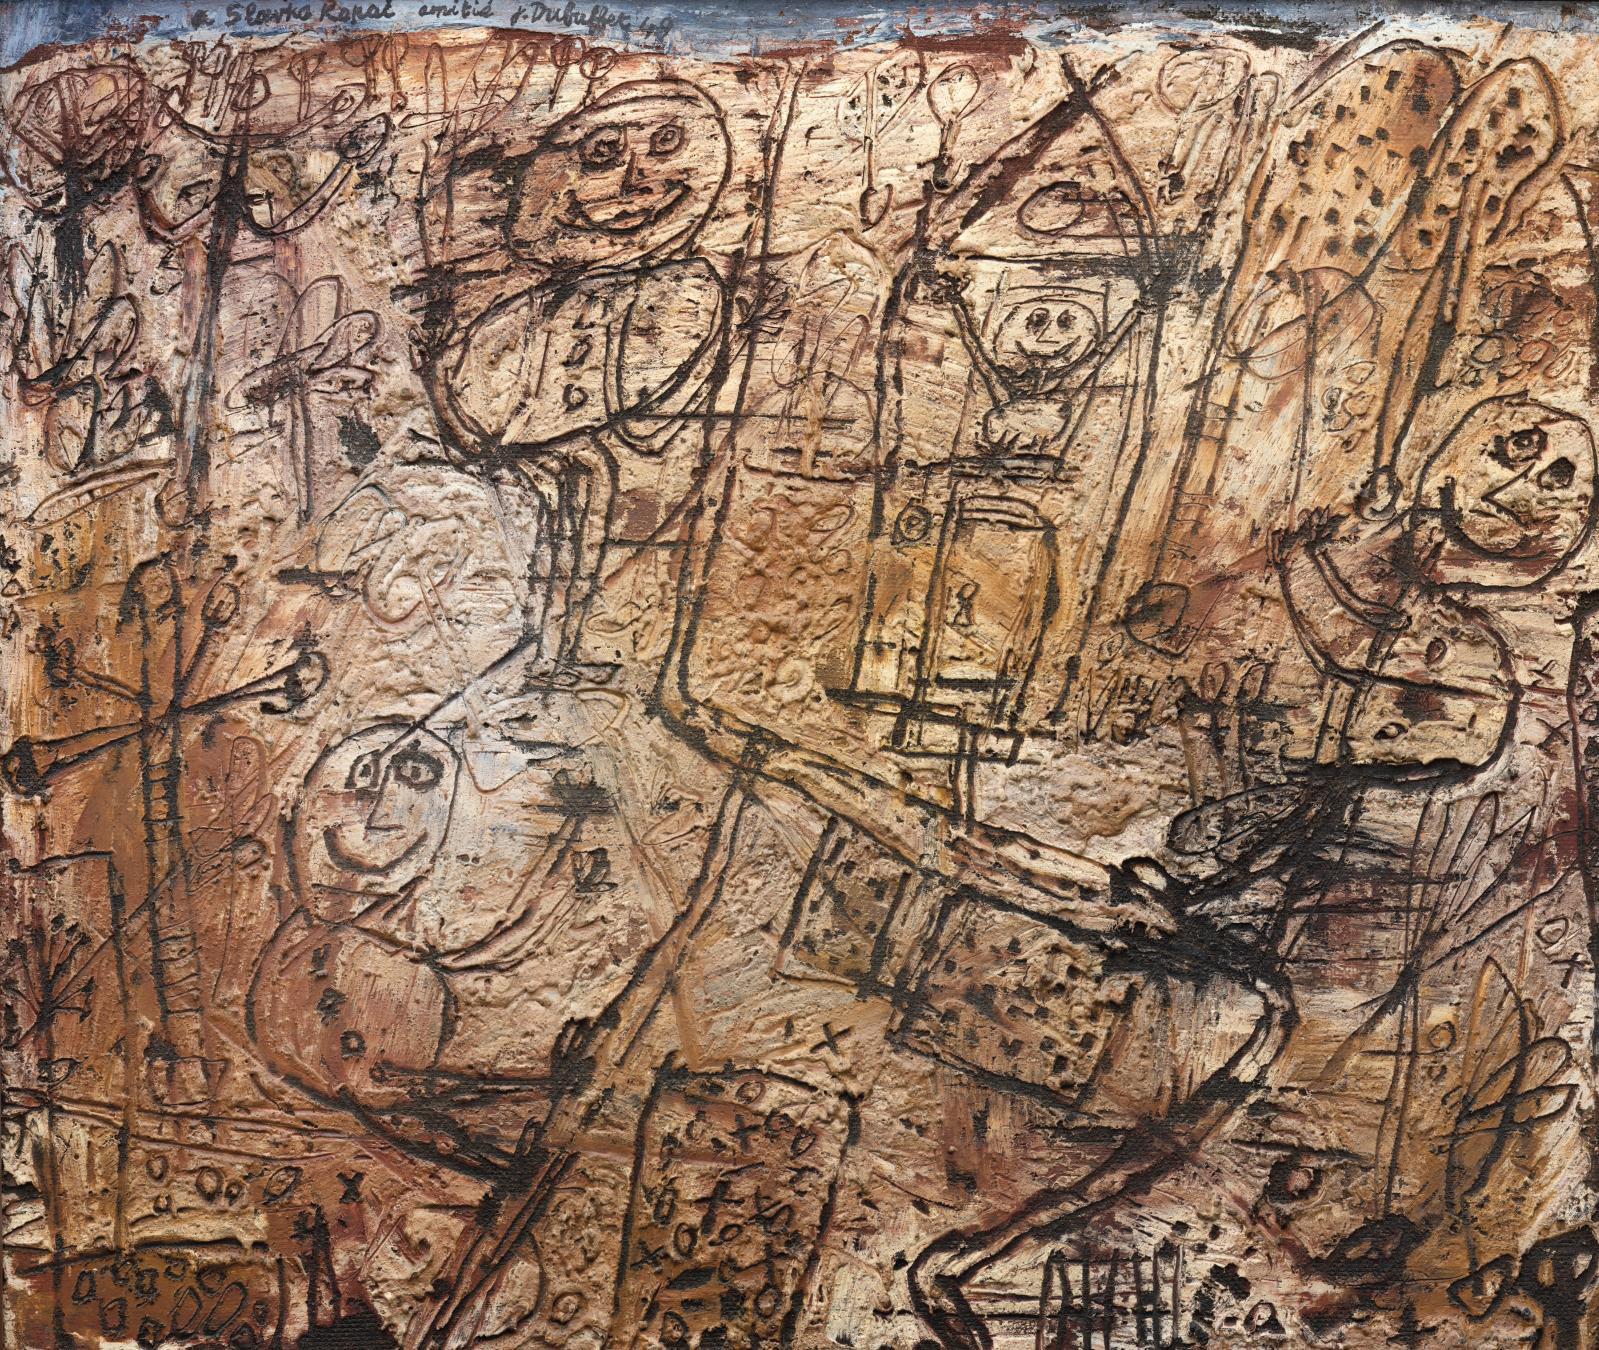 Jean Dubuffet (1901-1985), "Petit paysage avec personnages," 1949, oil on Isorel, signed, dated and dedicated to Slavko Kopac, 50 x 61 cm/19.7 x 24 in. Result: €747,040